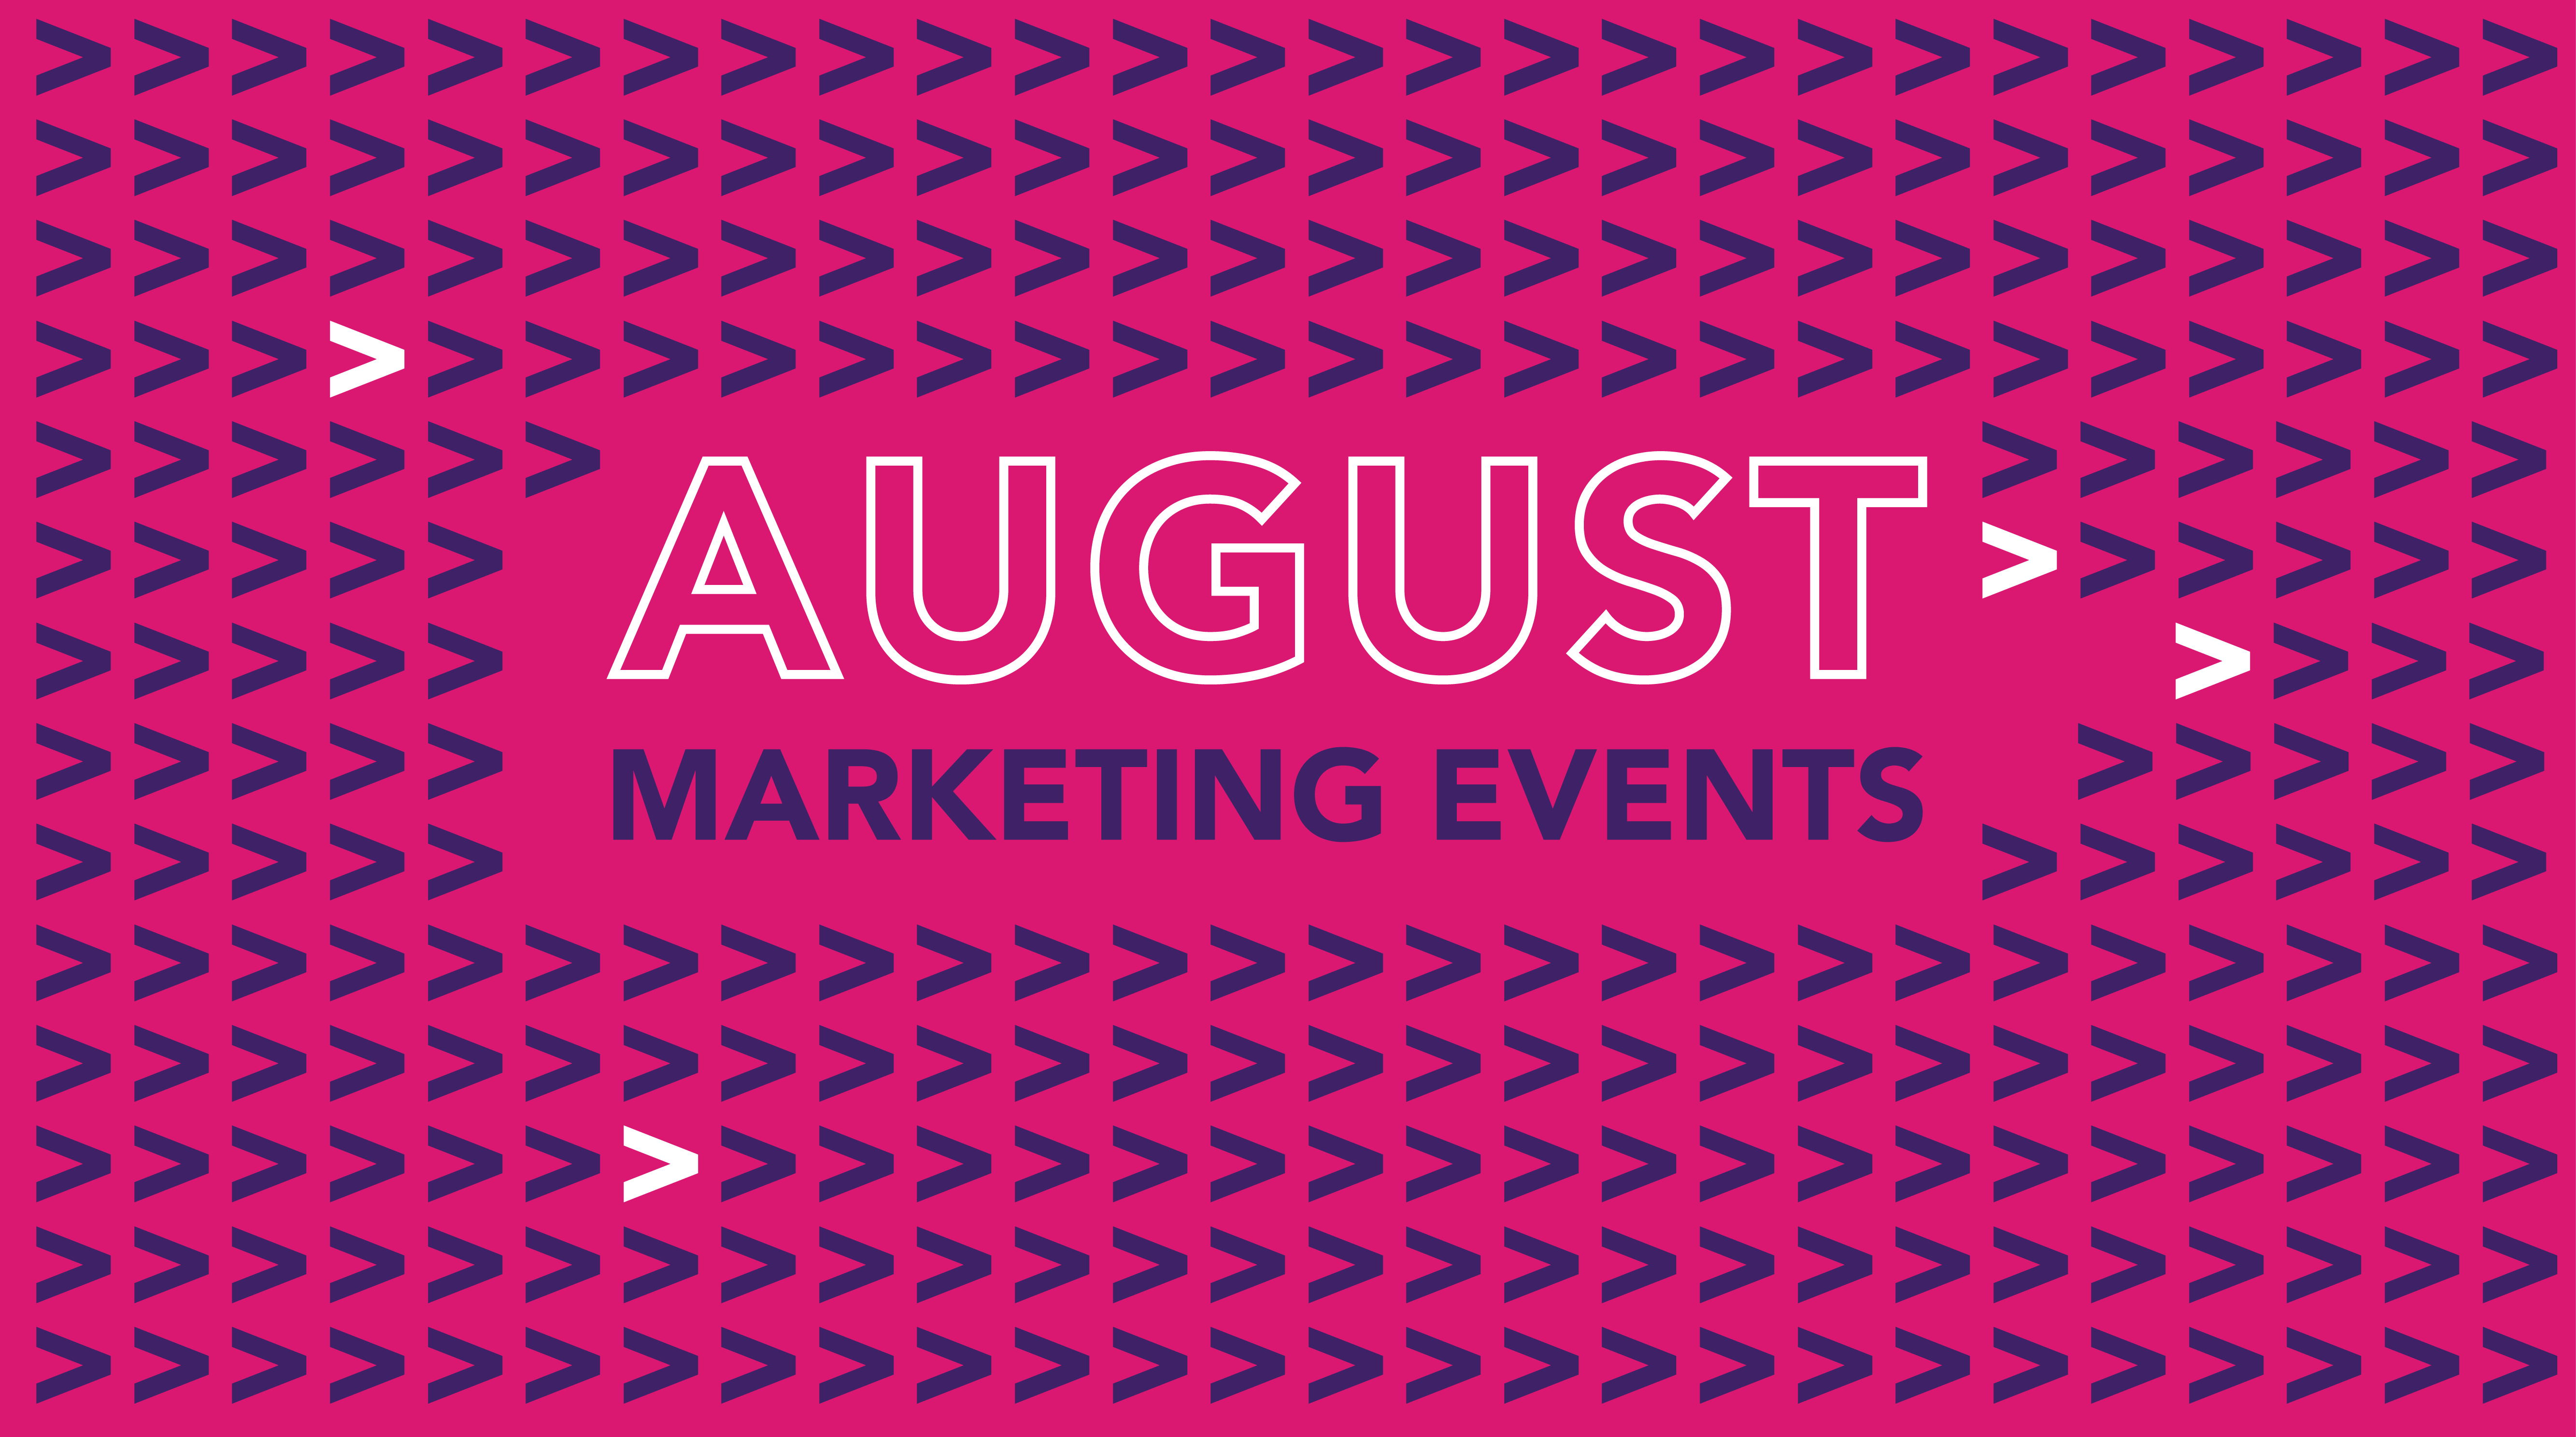 August 2015 Marketing and Design Events in St. Louis